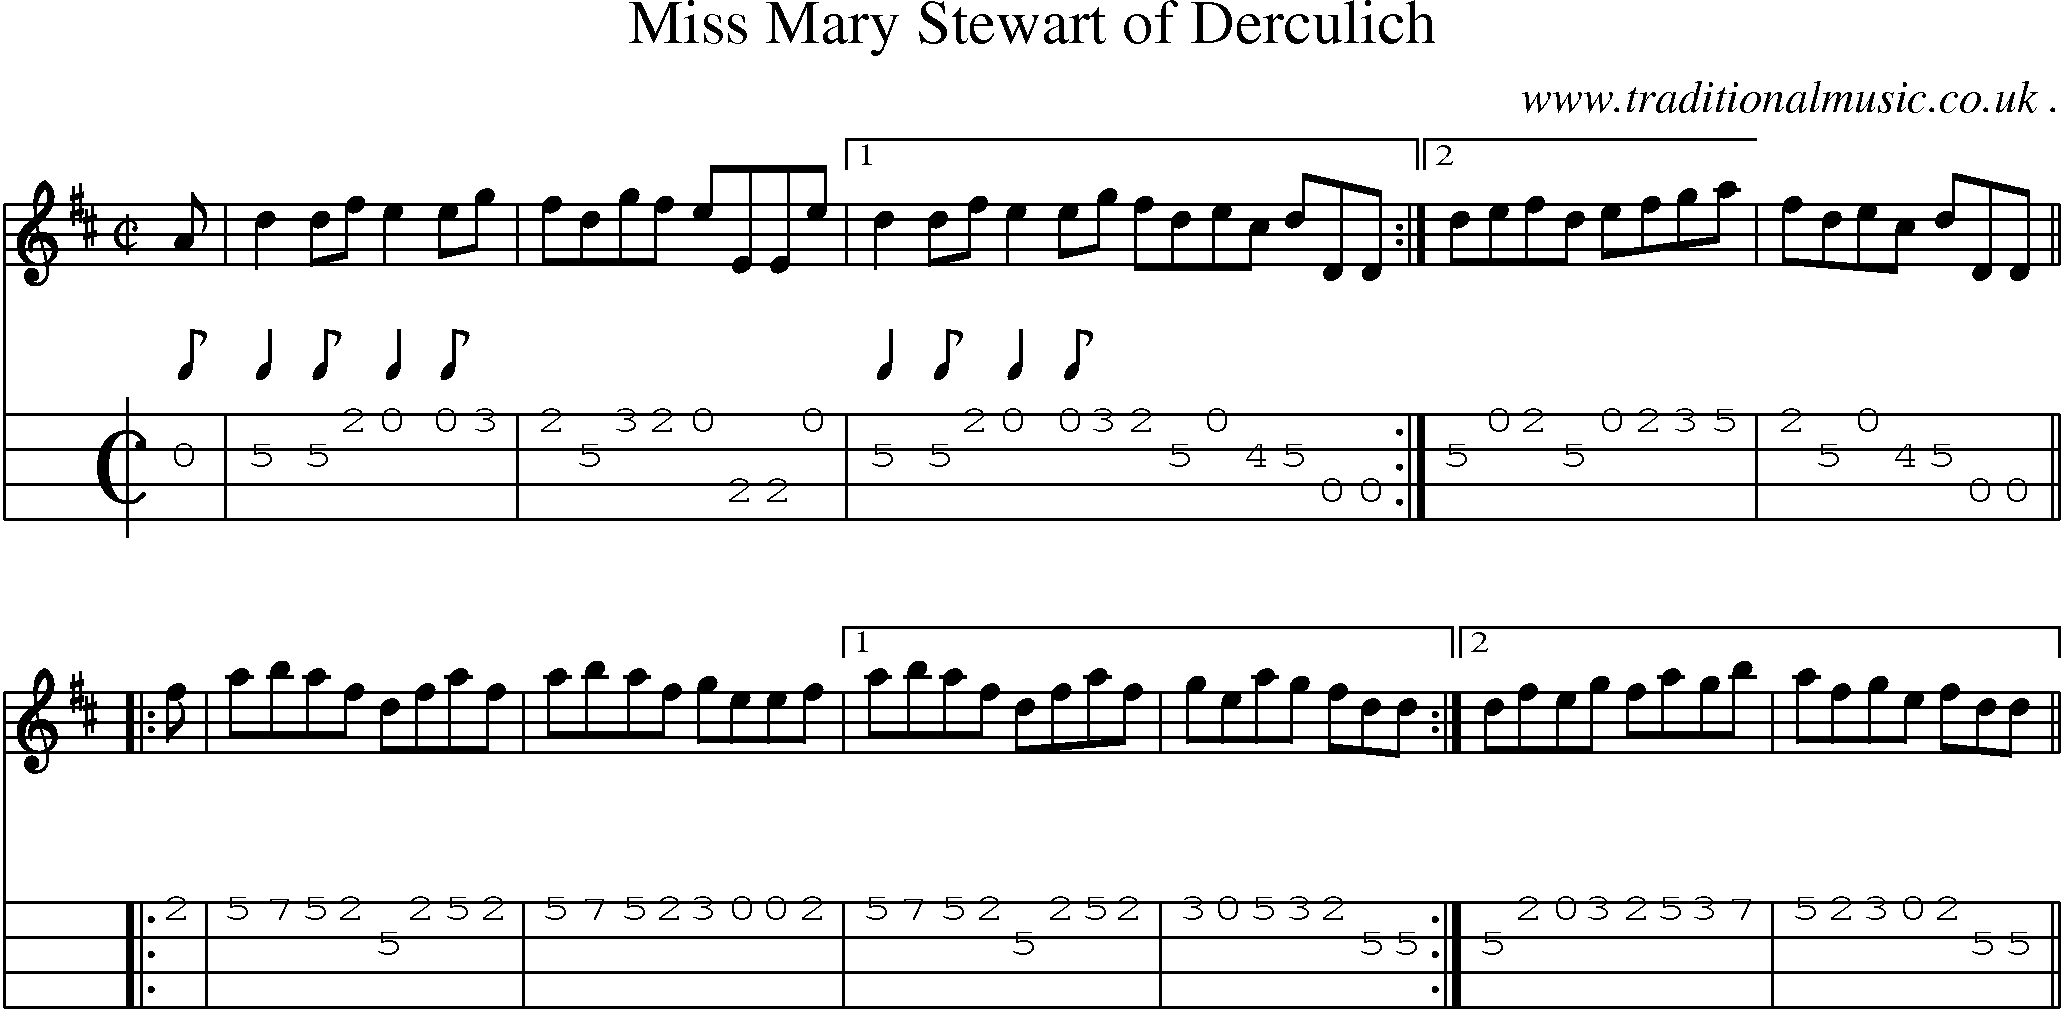 Sheet-music  score, Chords and Mandolin Tabs for Miss Mary Stewart Of Derculich